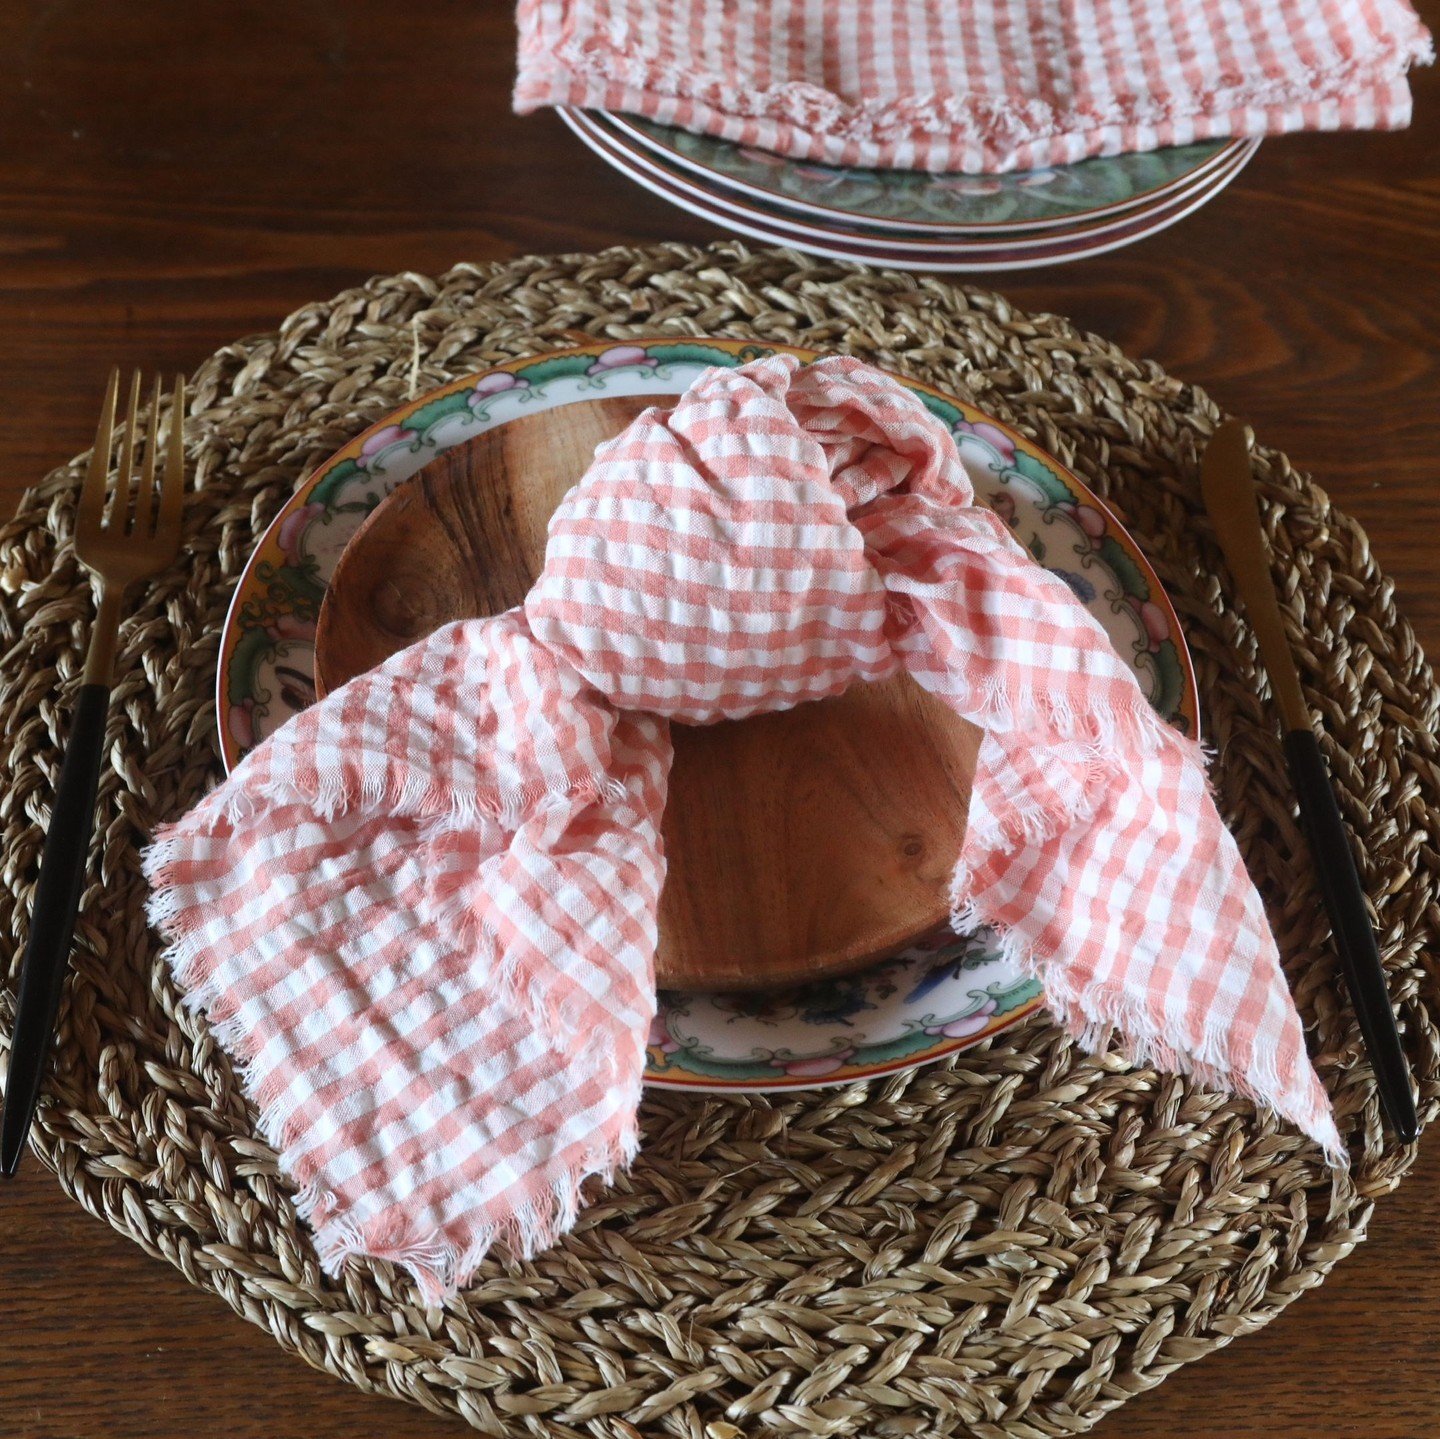 Keep a stack of cotton napkins handy for everyday meals. They're not just for special occasions! Using them regularly reduces your reliance on disposable options and promotes sustainable habits. 

#seersucker #sustainableliving #tablelinens